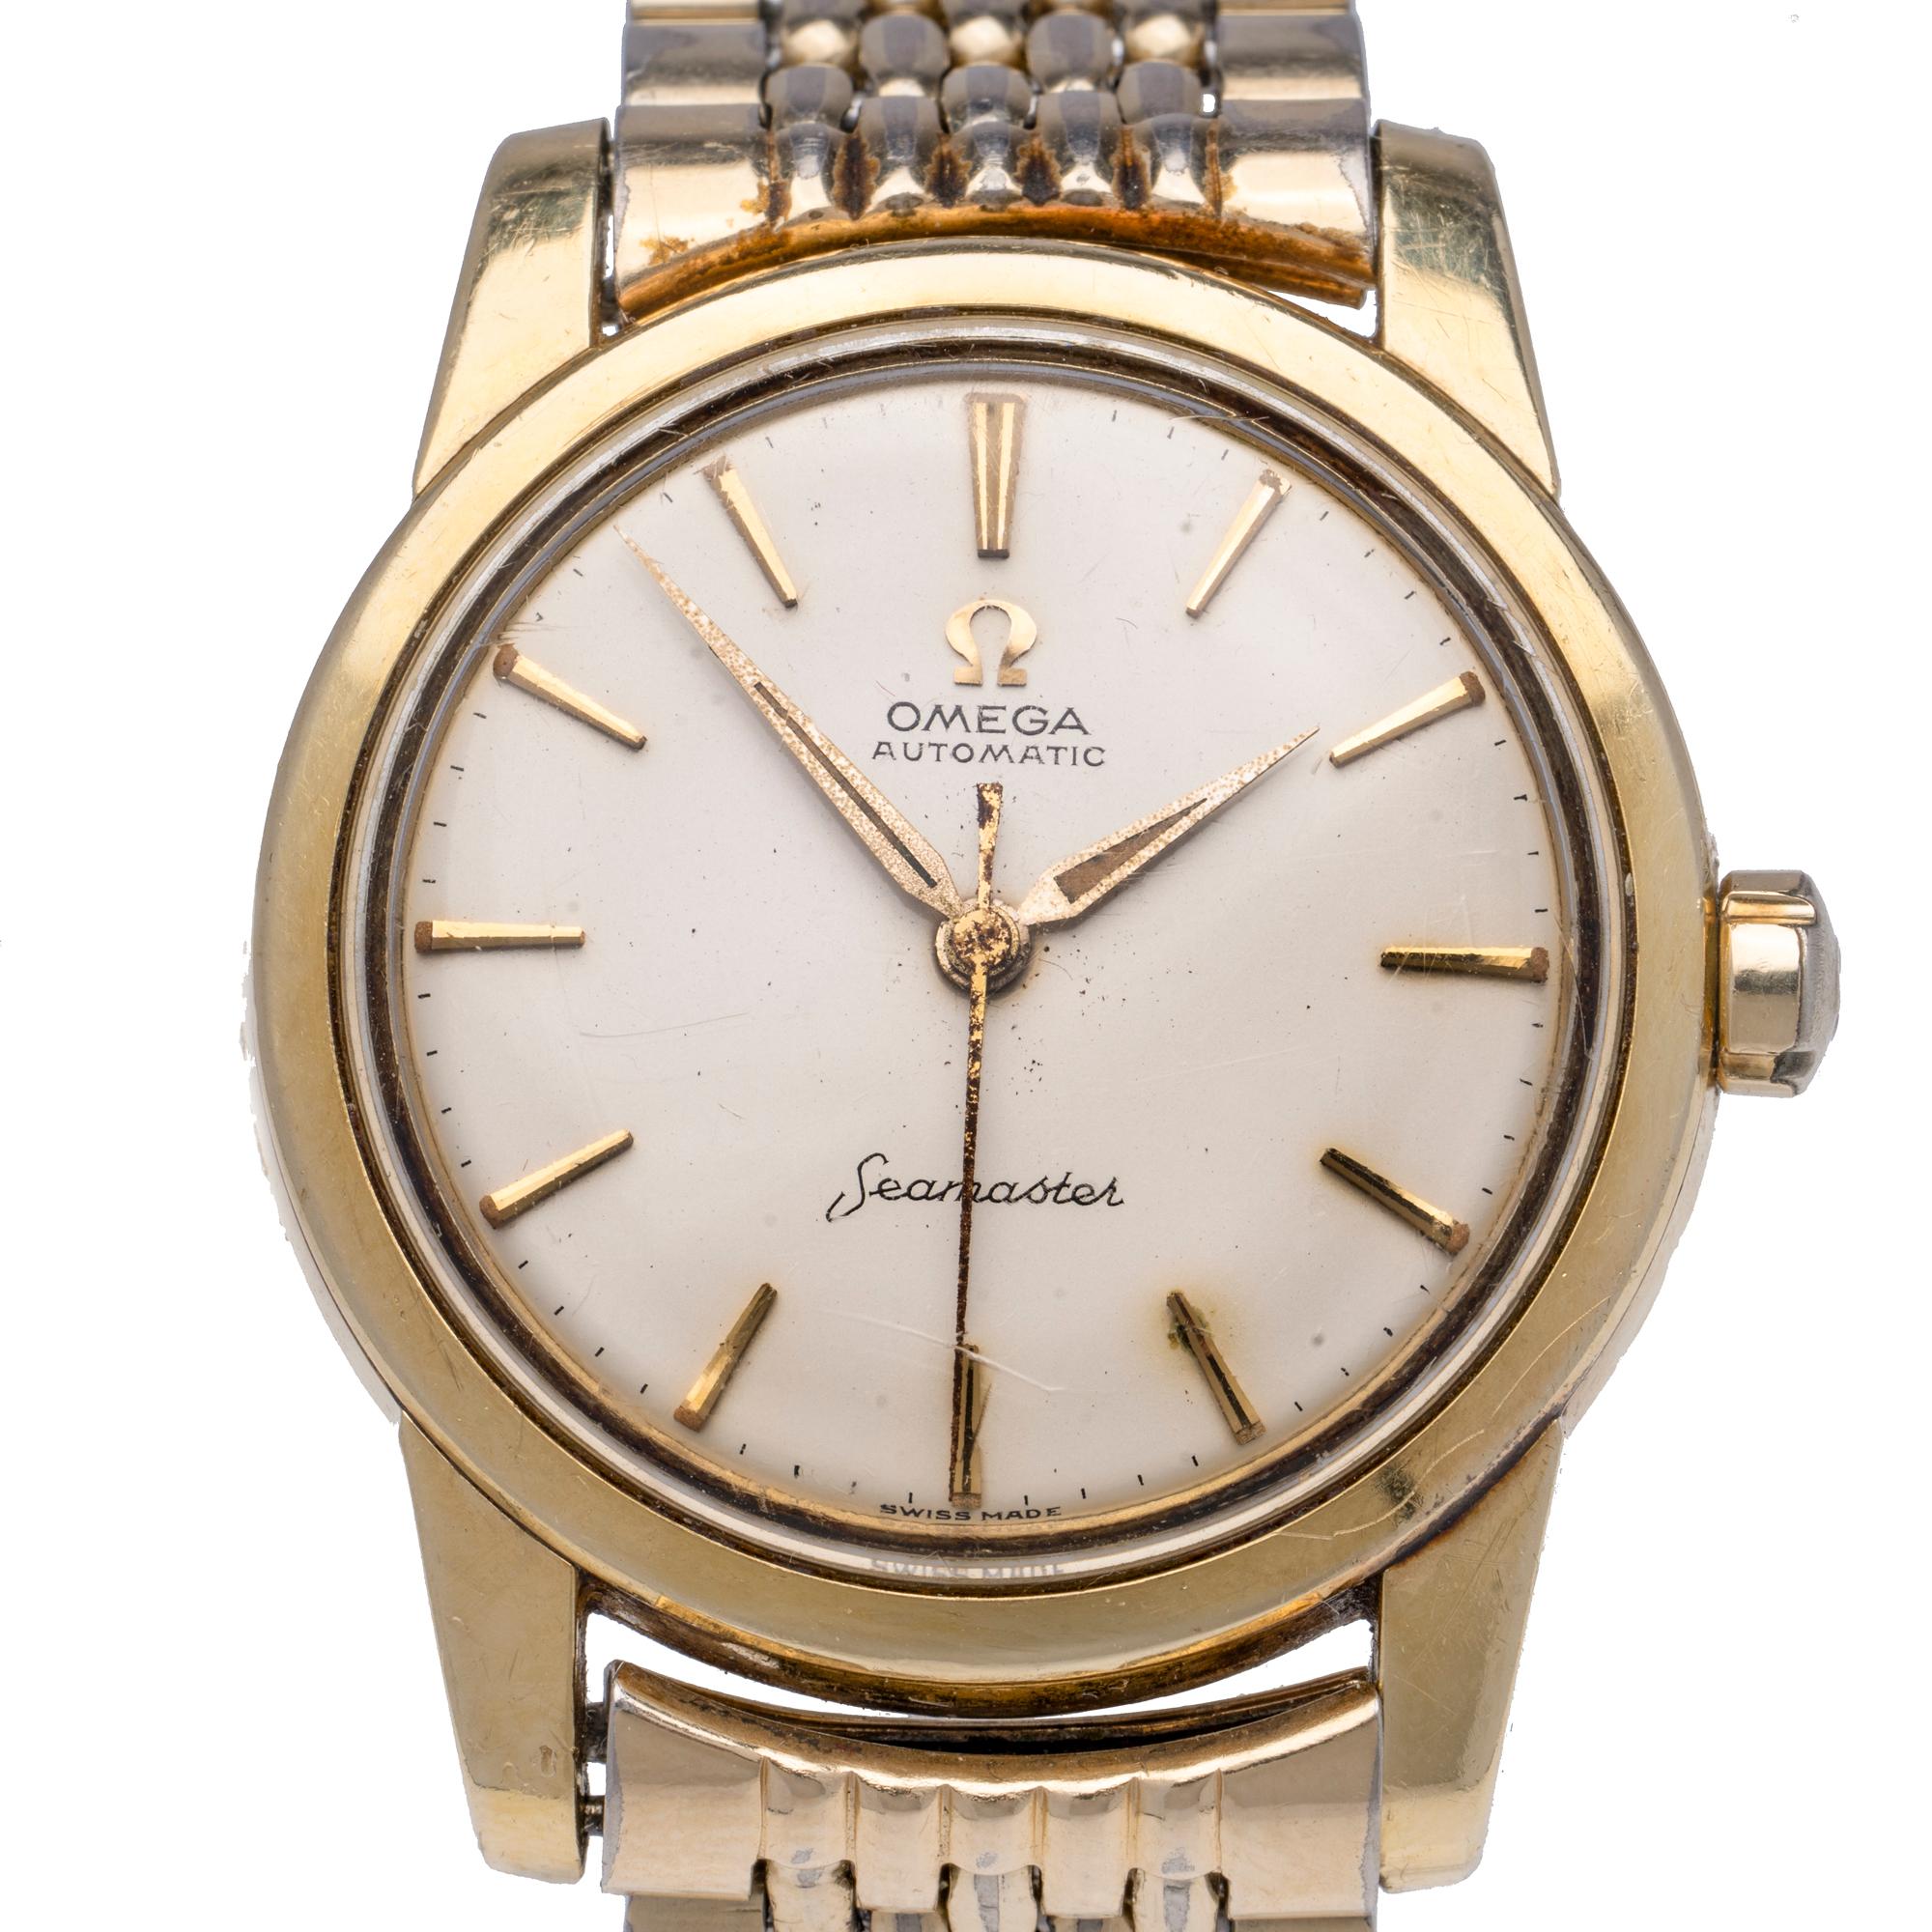 value of 1960 omega seamaster watch